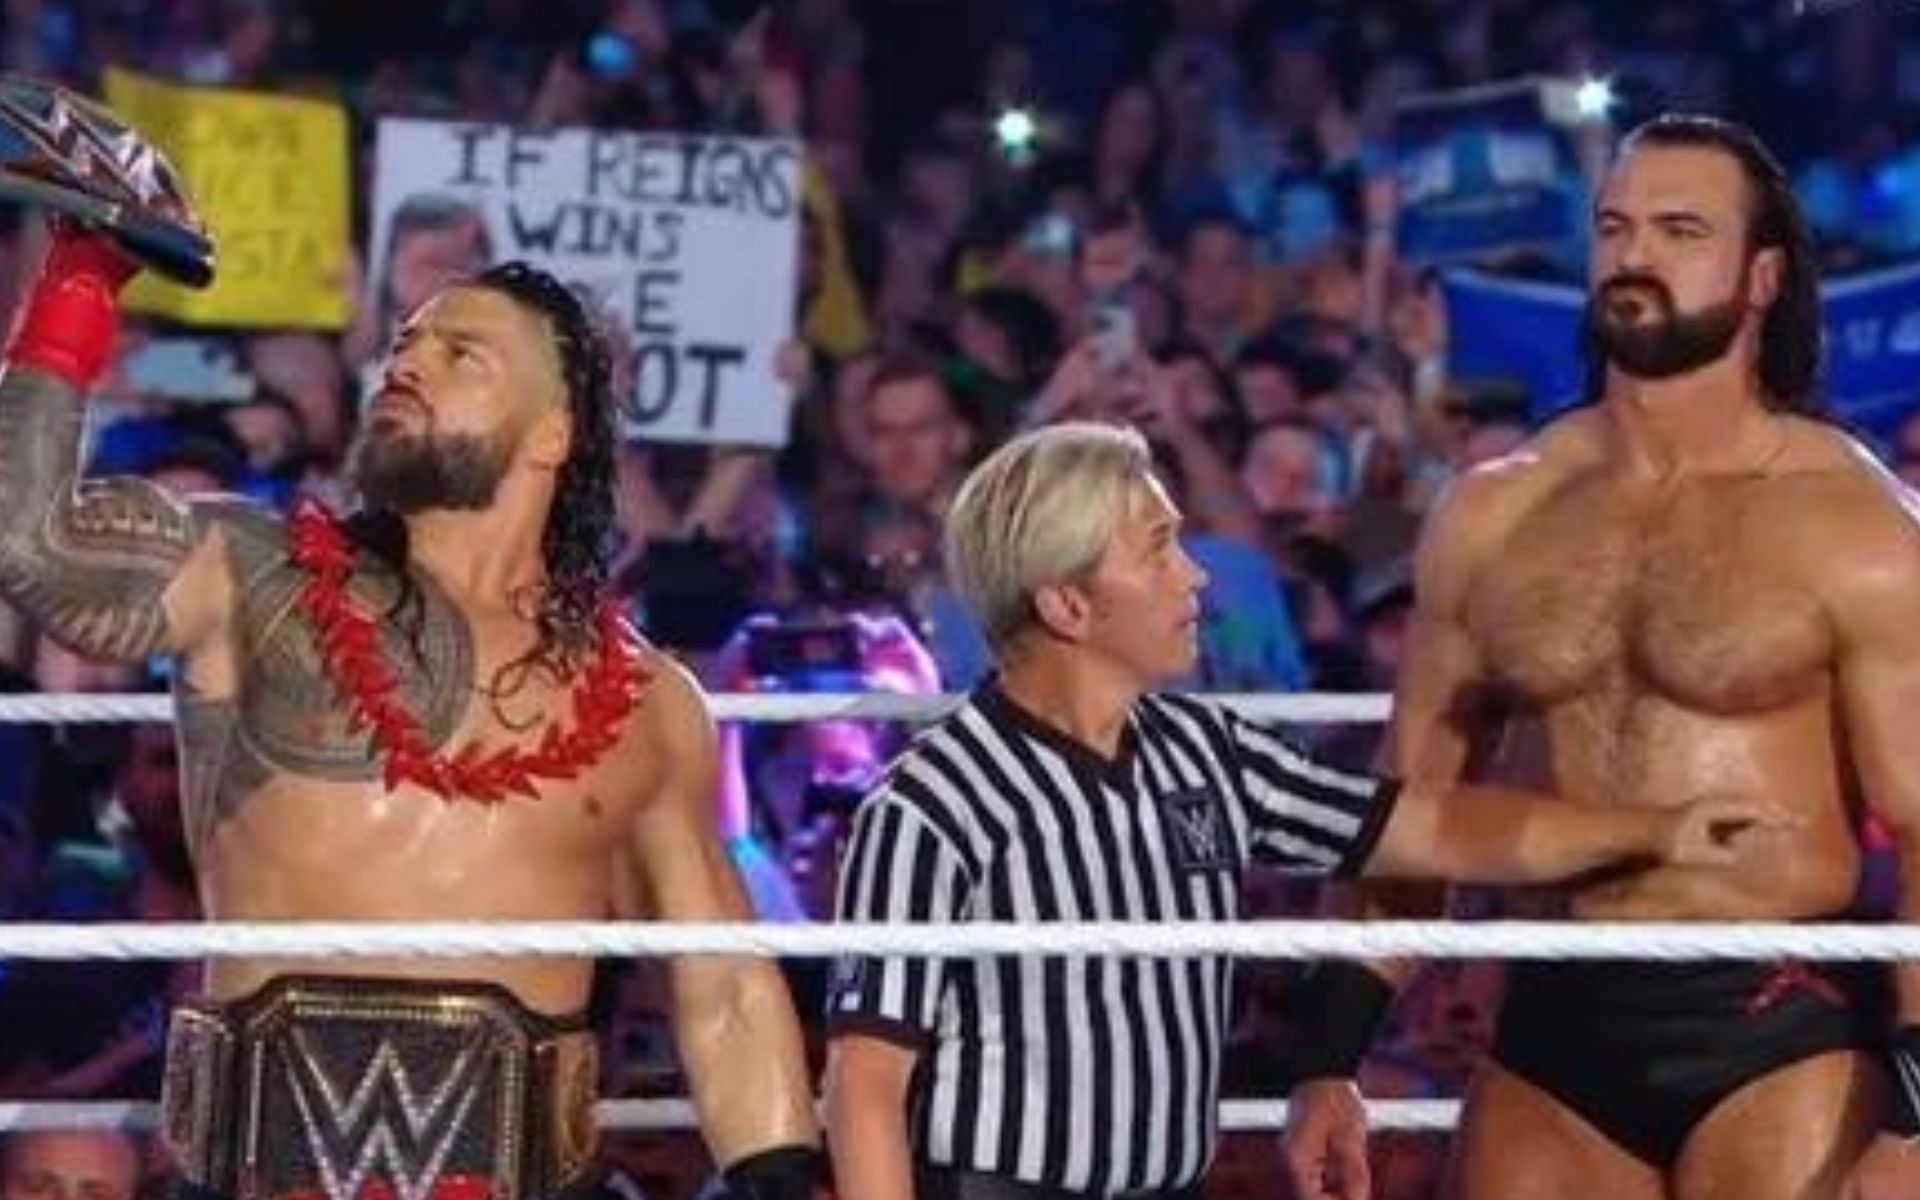 Roman Reigns and Drew McIntyre had a vicious match at the WWE premium live event